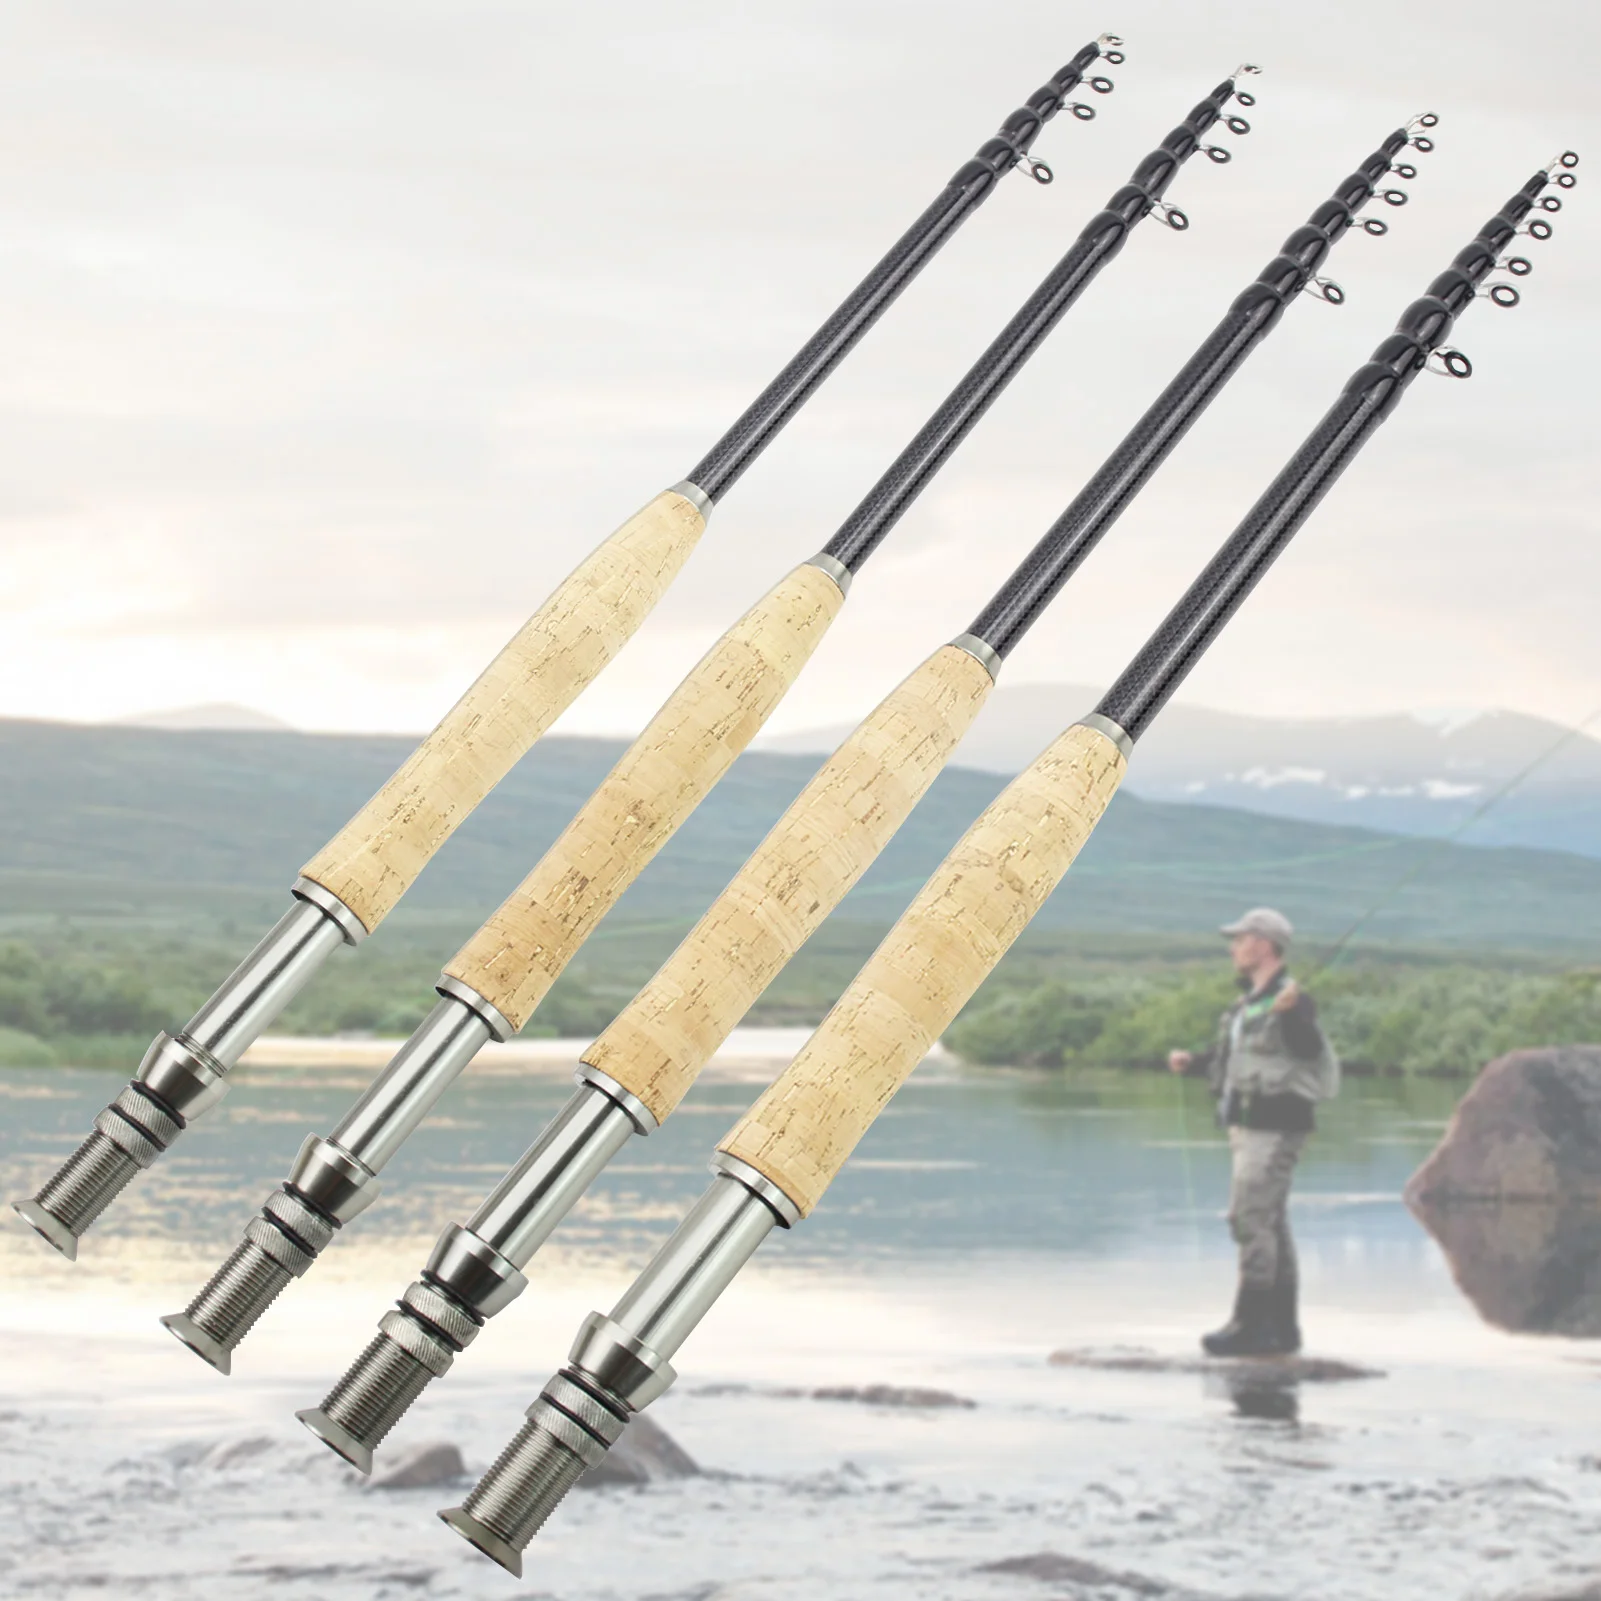 NEW 2.1M 2.4M 2.7M 3.0M Telescopic Fly Fishing Rod Portable Carbon Fast Action Trout Fly FISH Pole Goods for Fishing FISH TACKL